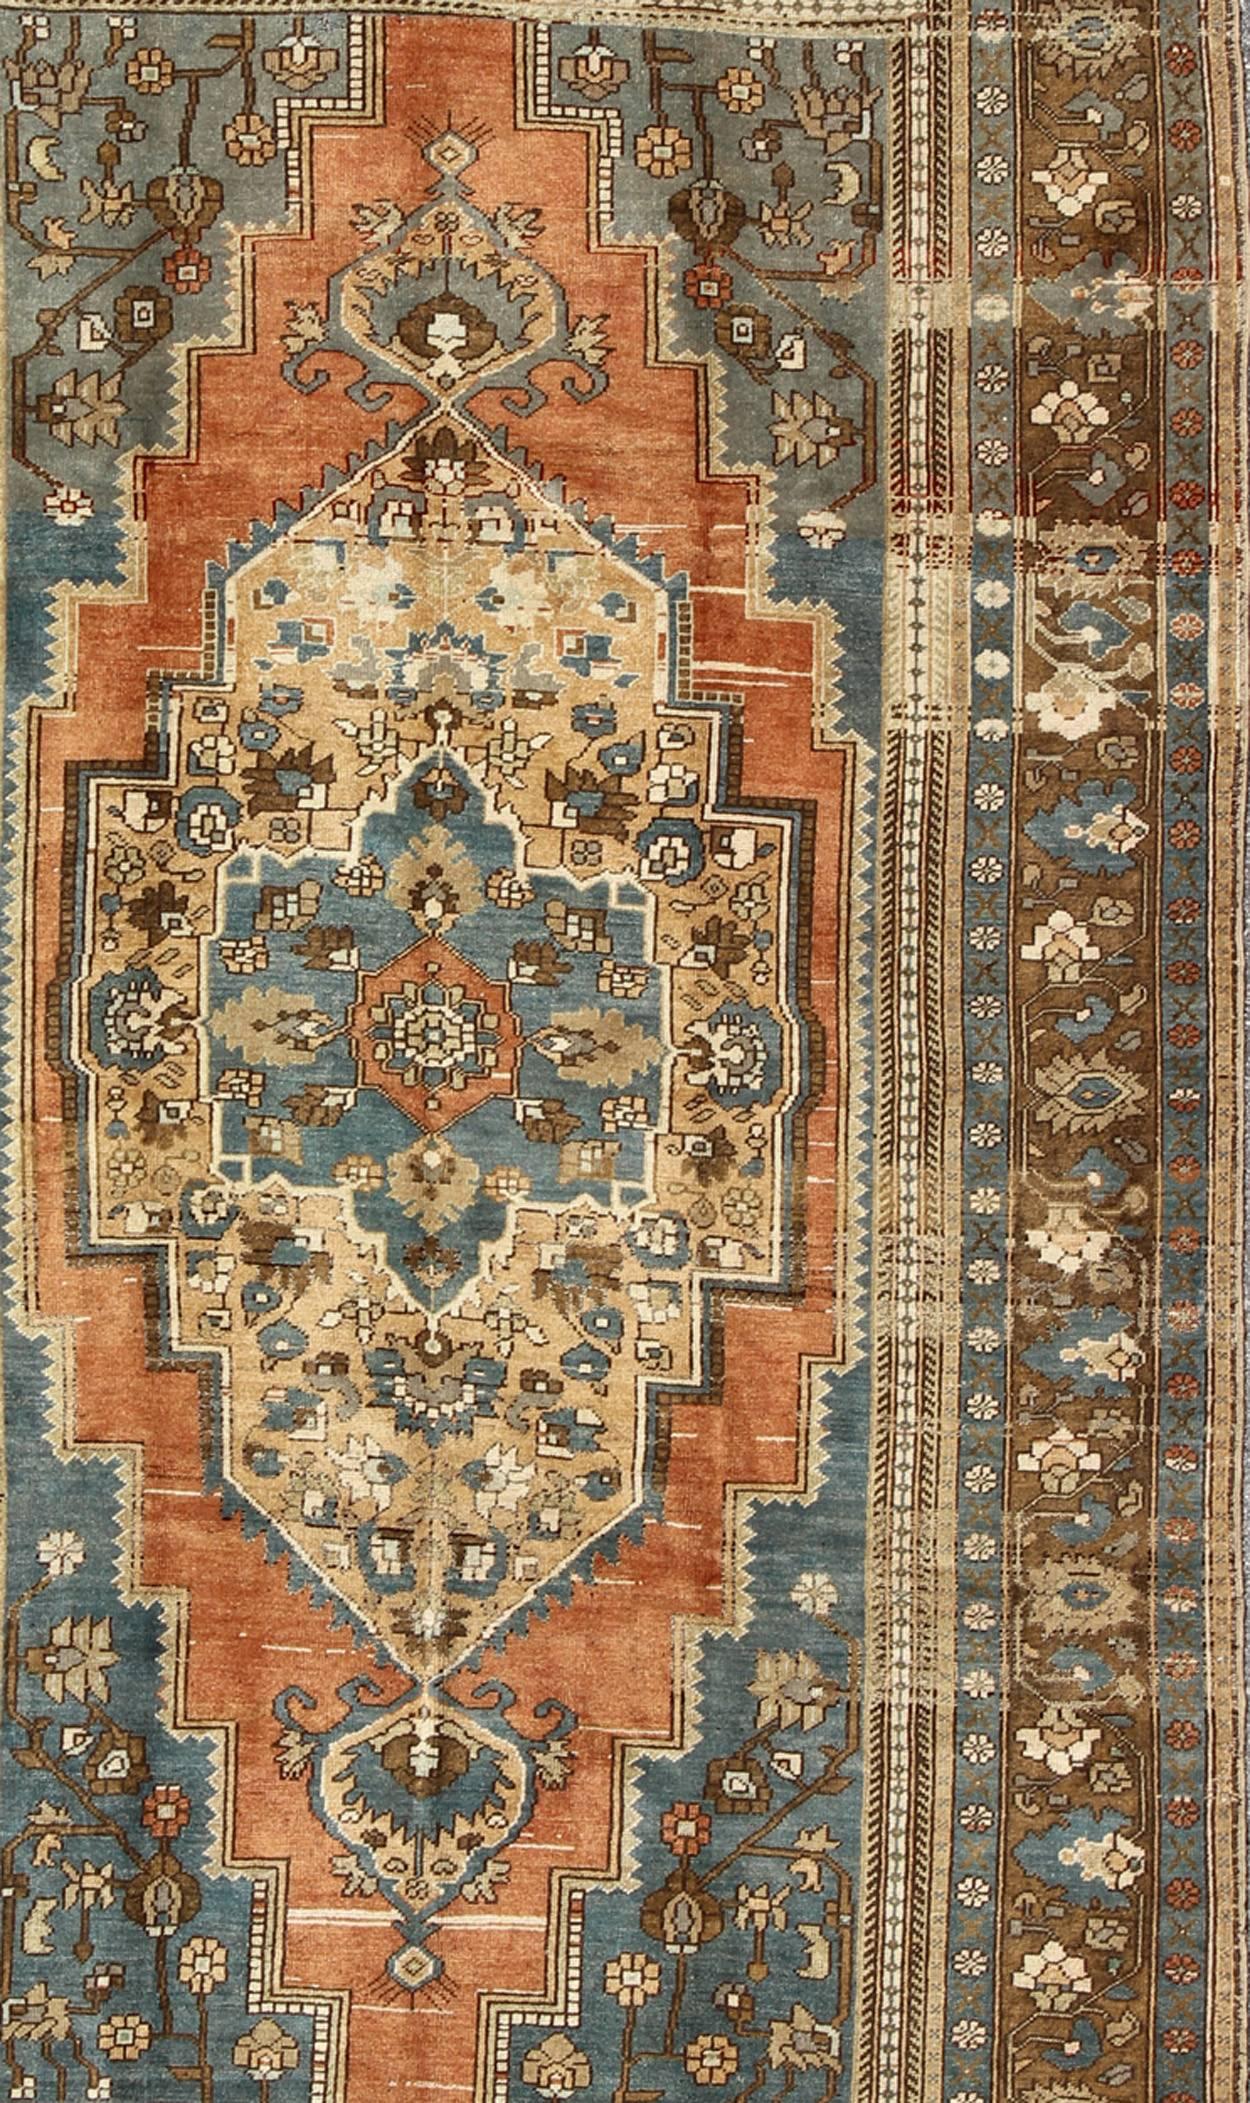 Mid-20th Century Antique Turkish Colorful Oushak Gallery Rug In Blue Brown & Terra-cotta For Sale